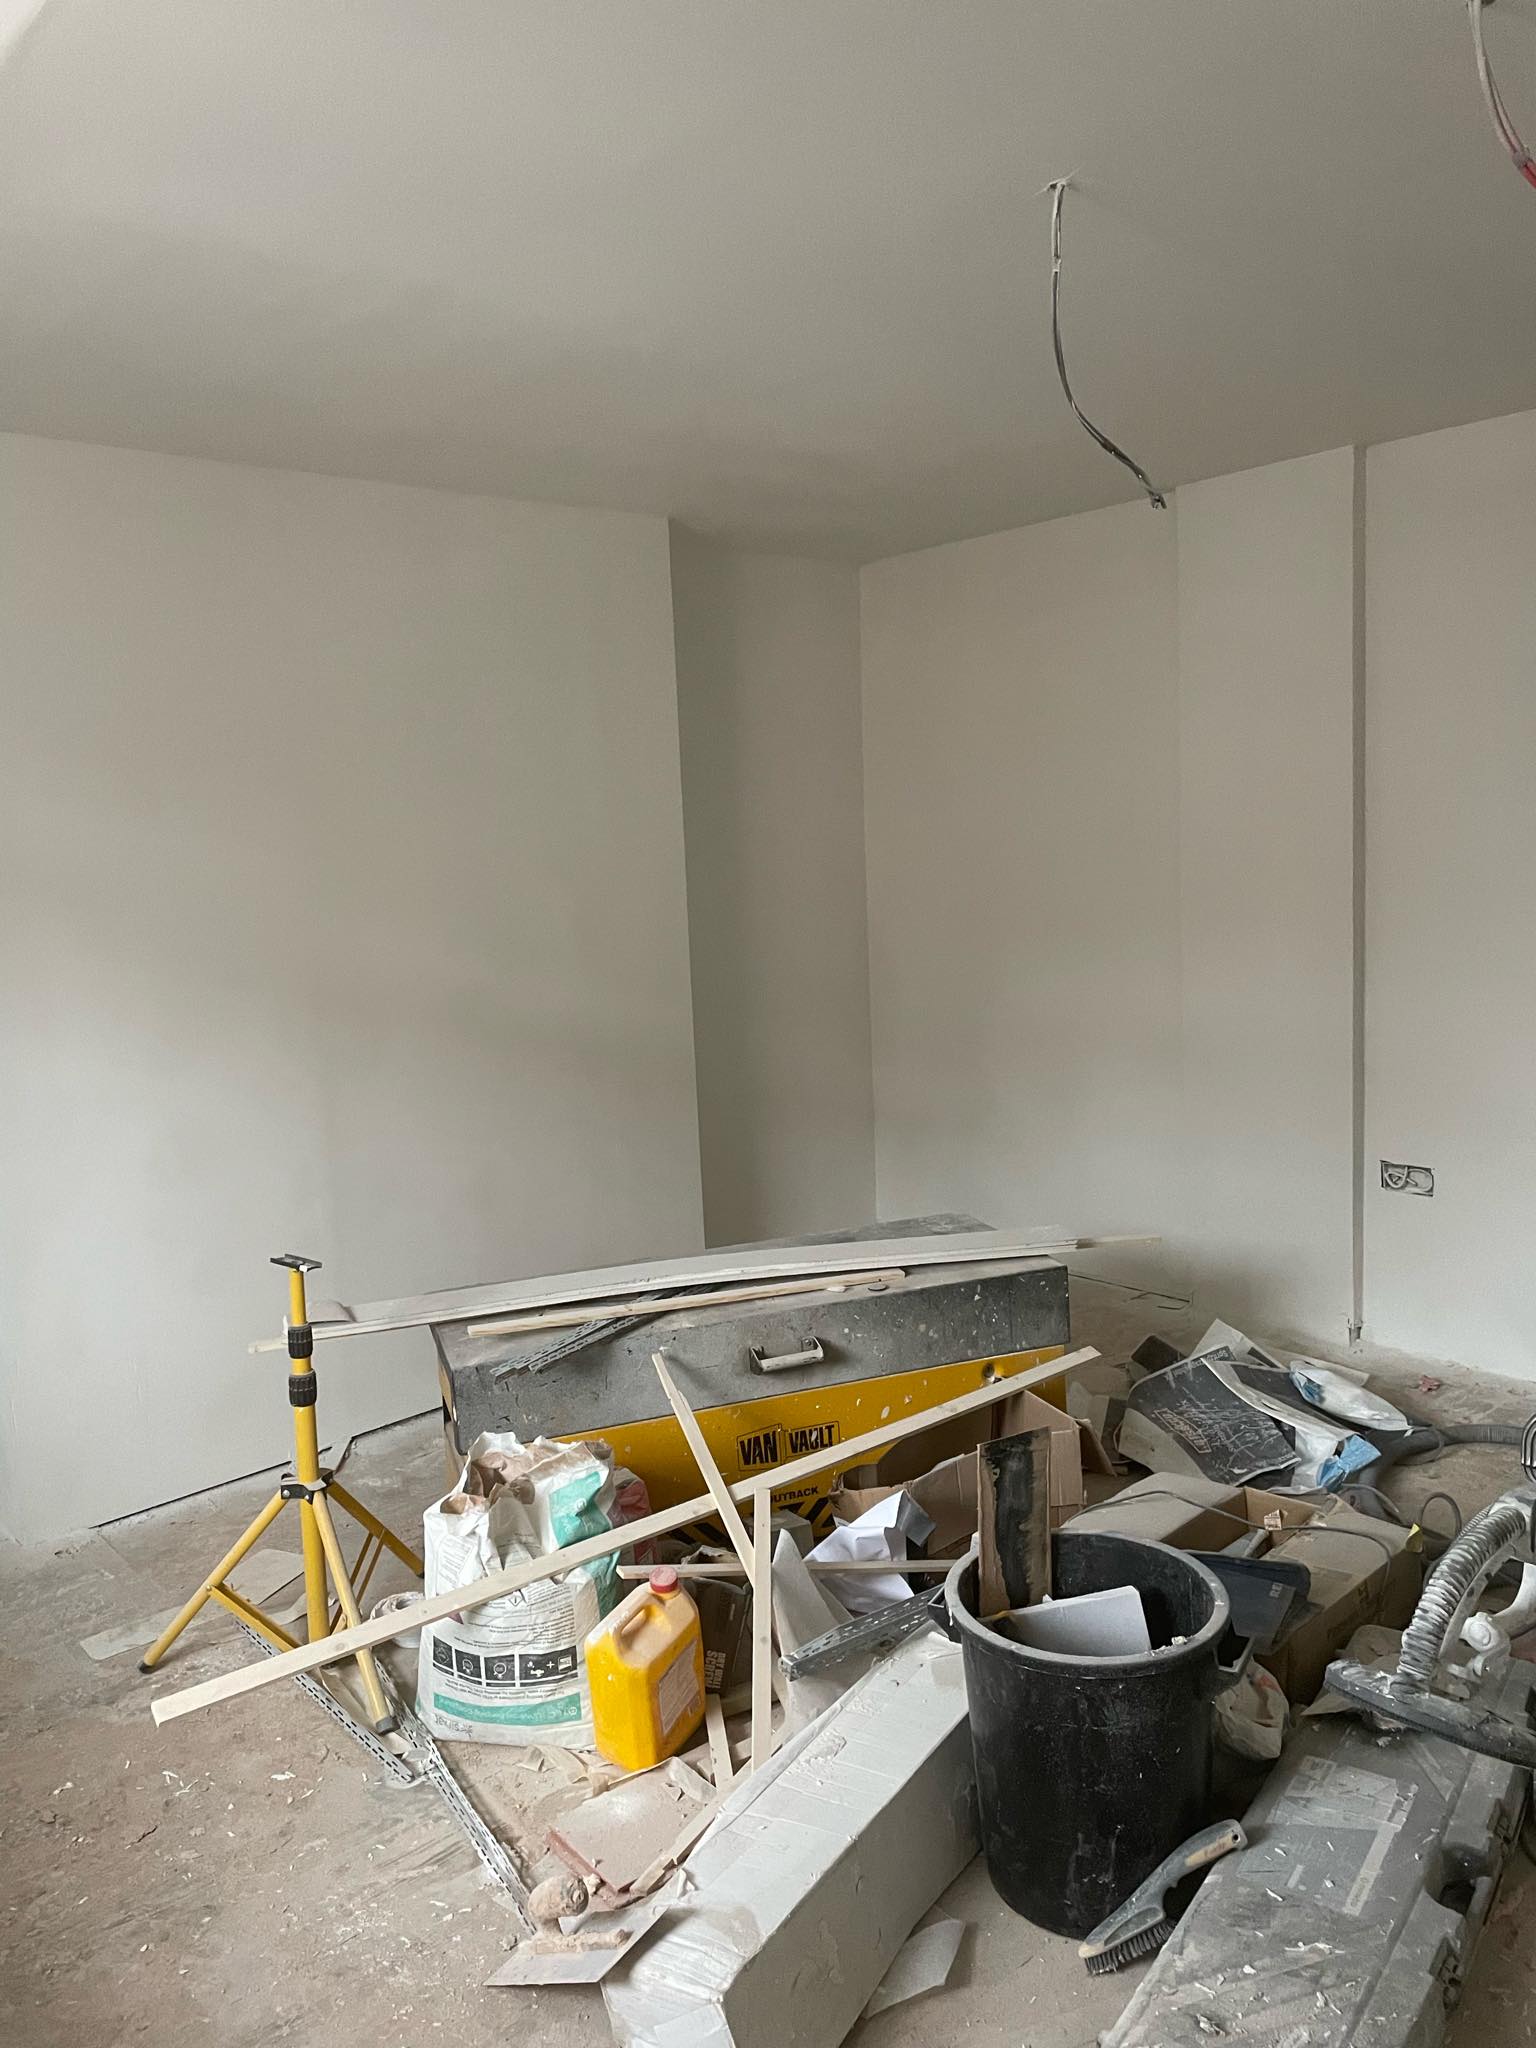 Plastering, painting and decorating